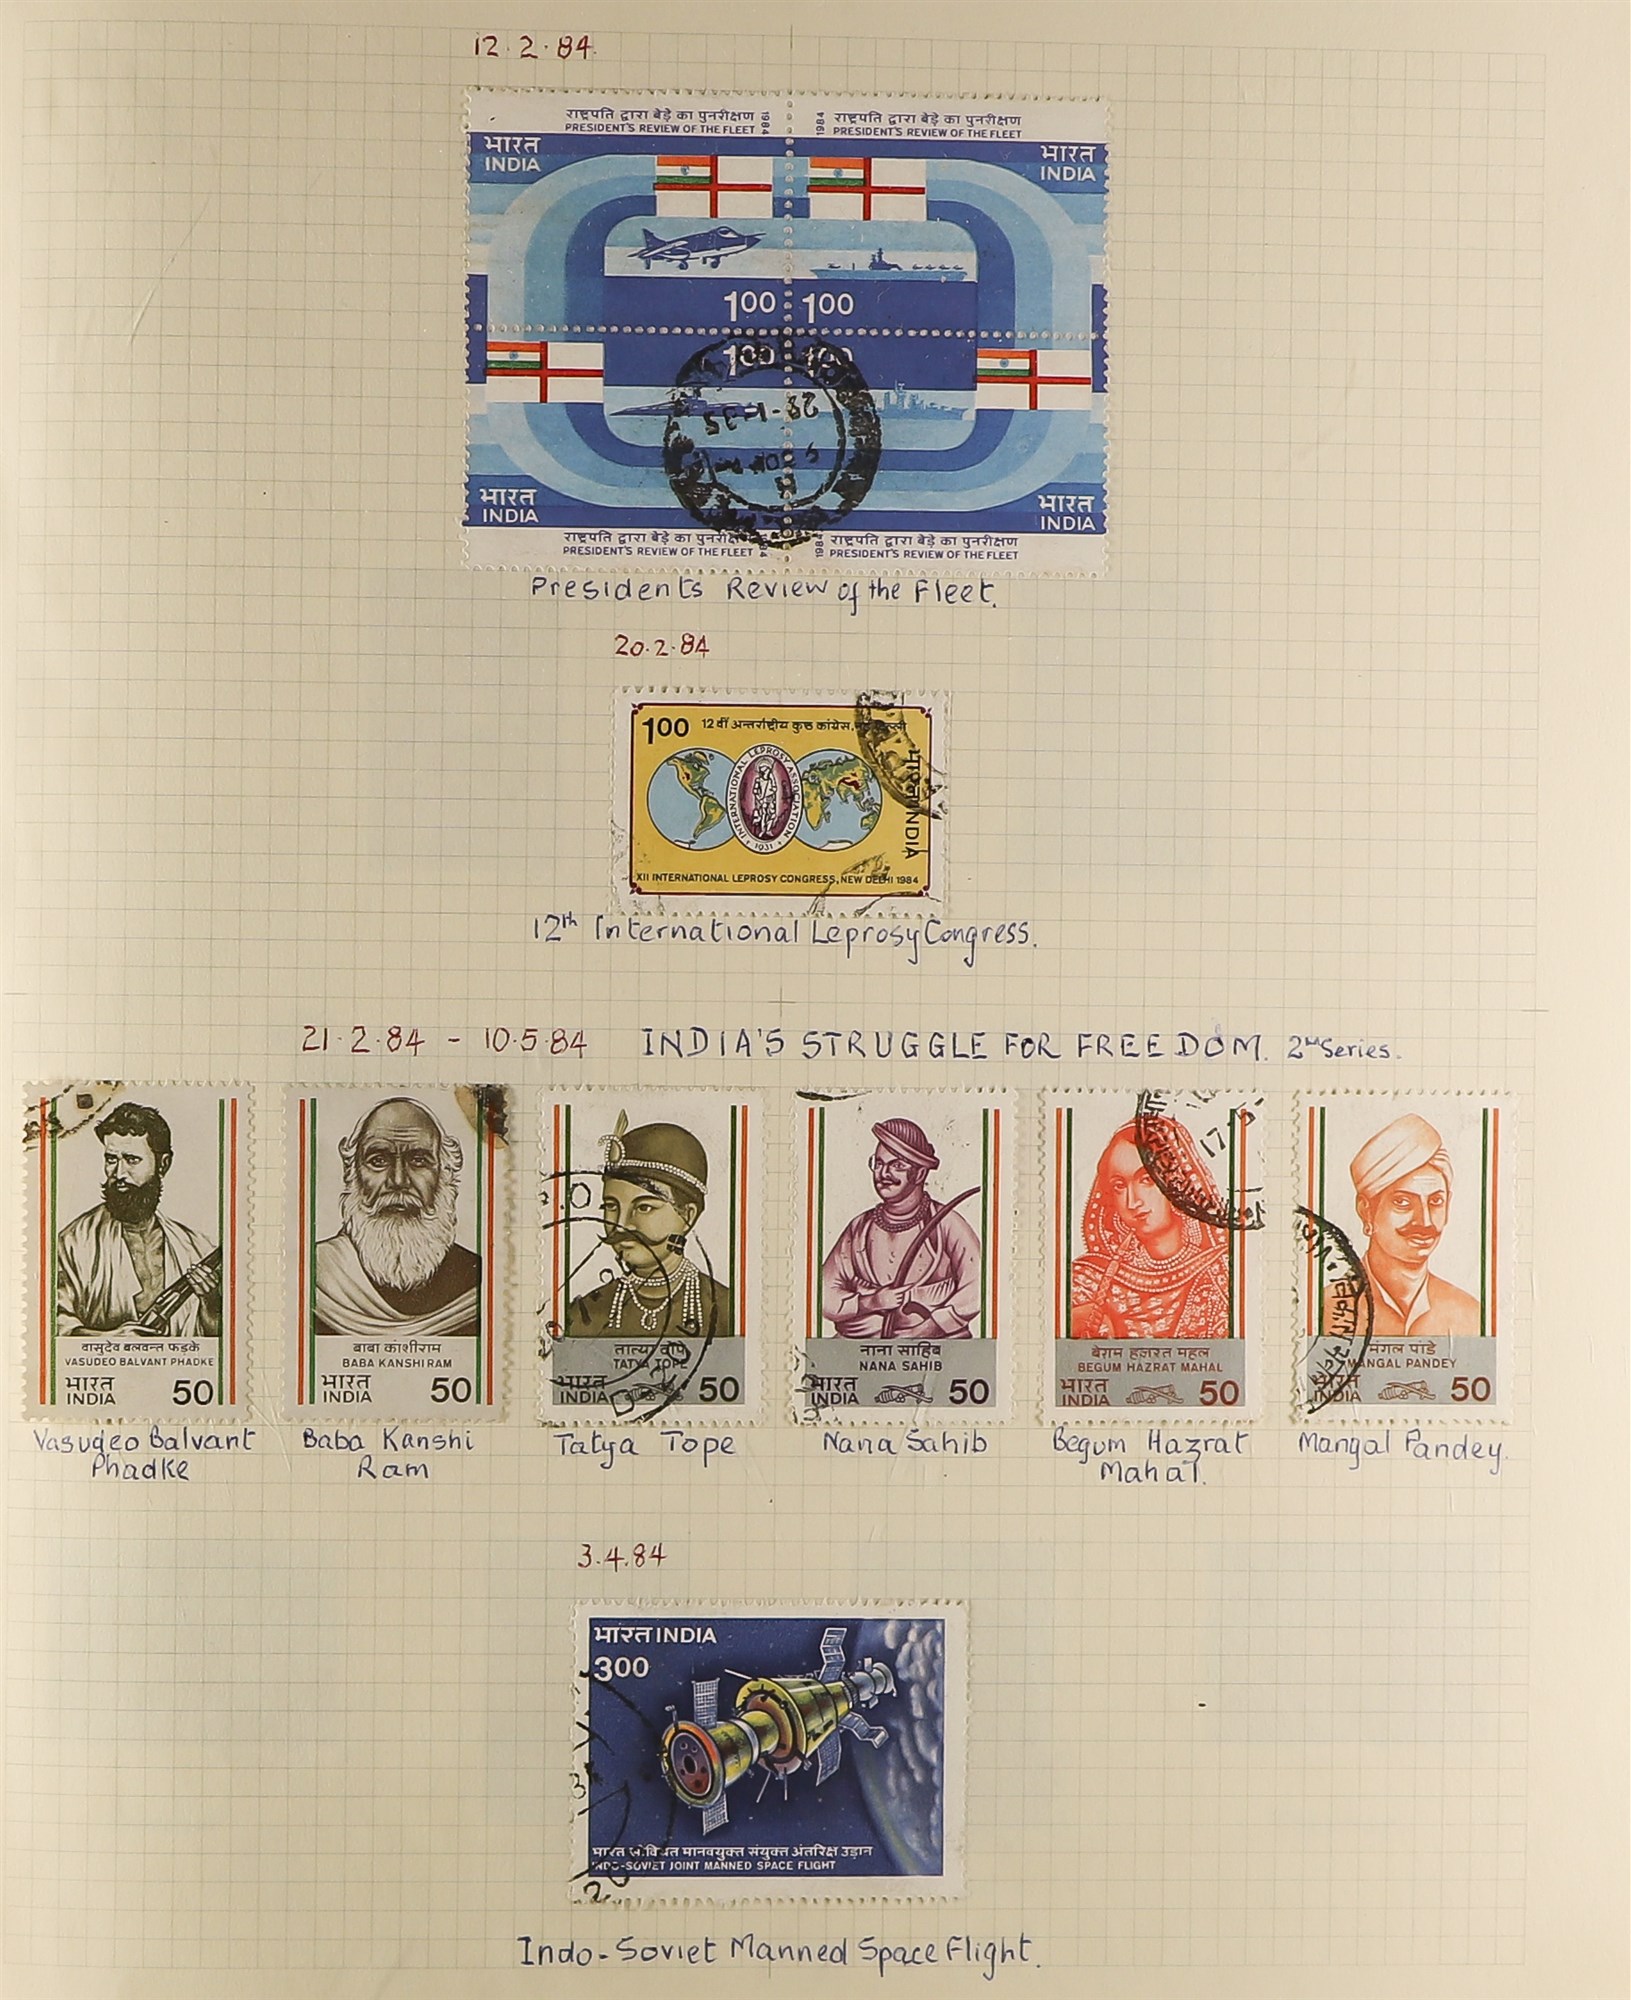 INDIA 1974 - 1992 COMMEMORATIVES USED COLLECTION complete from 1974 Patriot & Ruler 25p to the end - Image 5 of 16